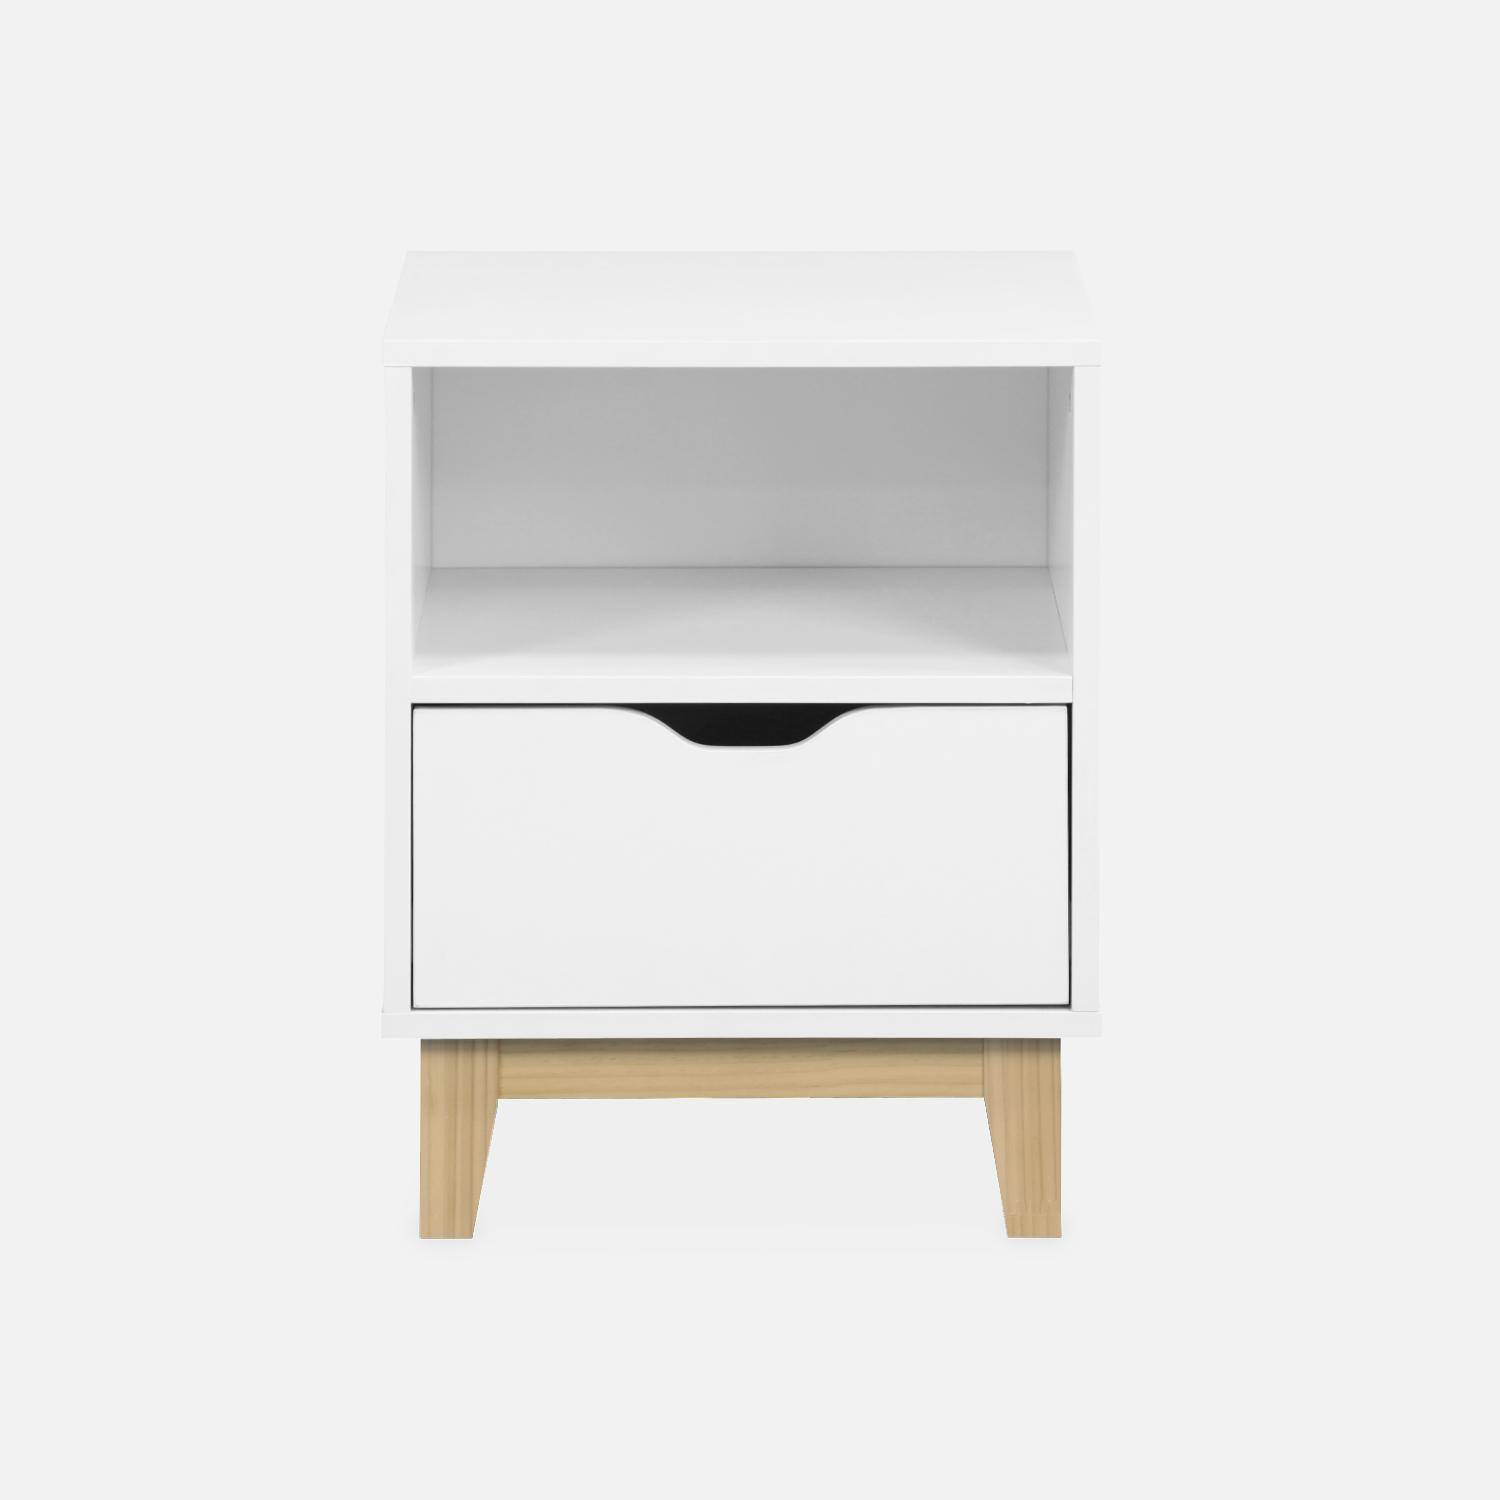 White bedside table with fir wood legs - Floki - 40 x 39 x 52cm - 1 drawer and 1 niche,sweeek,Photo5